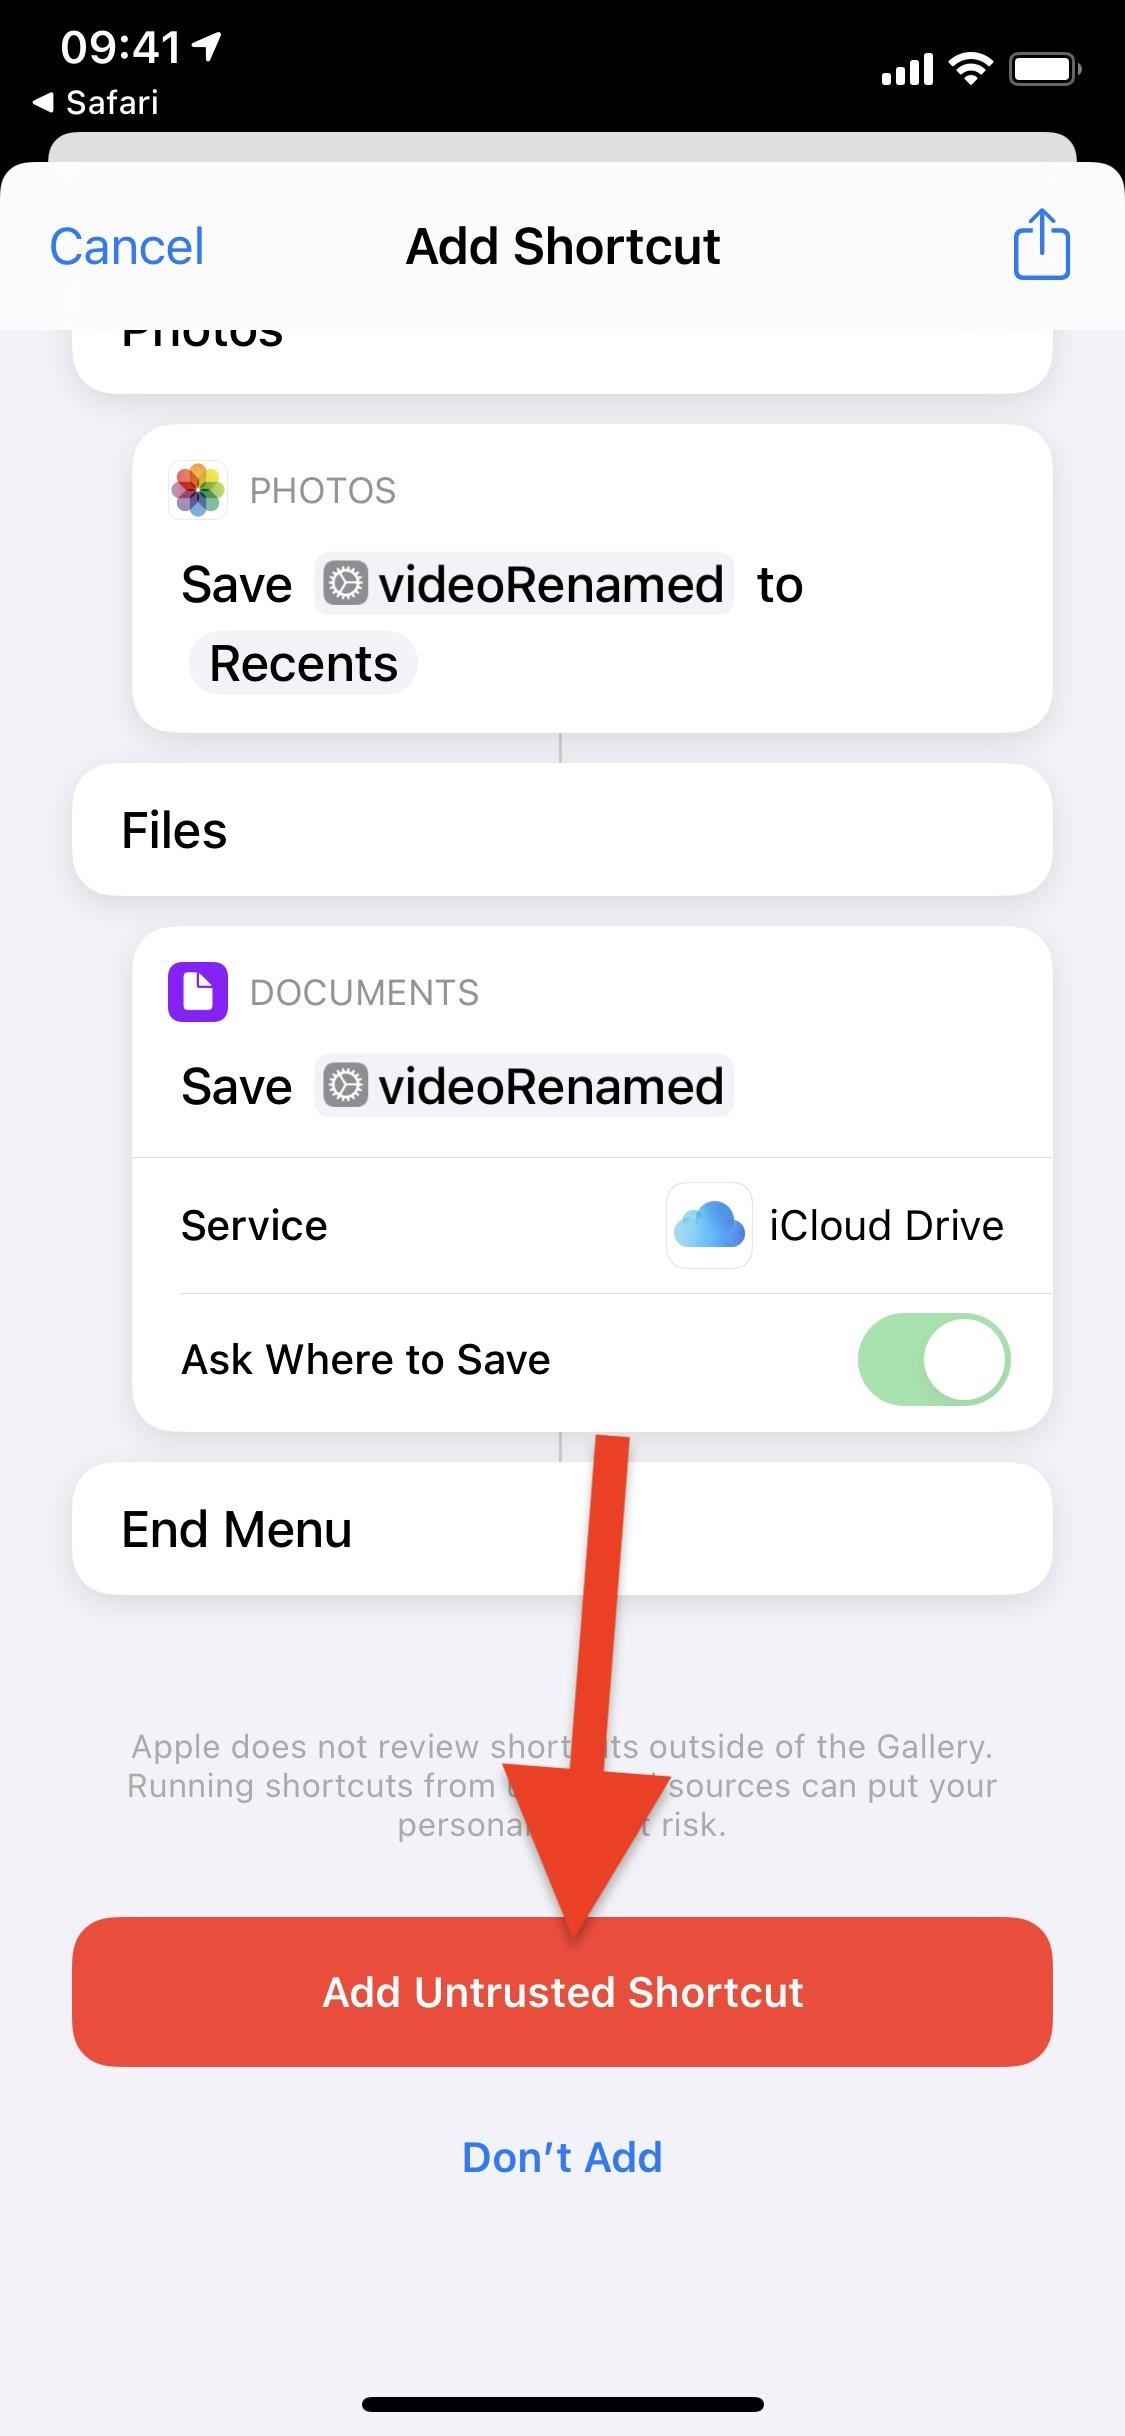 How to Quickly Download Streamable Videos on Your iPhone Before They Disappear Online